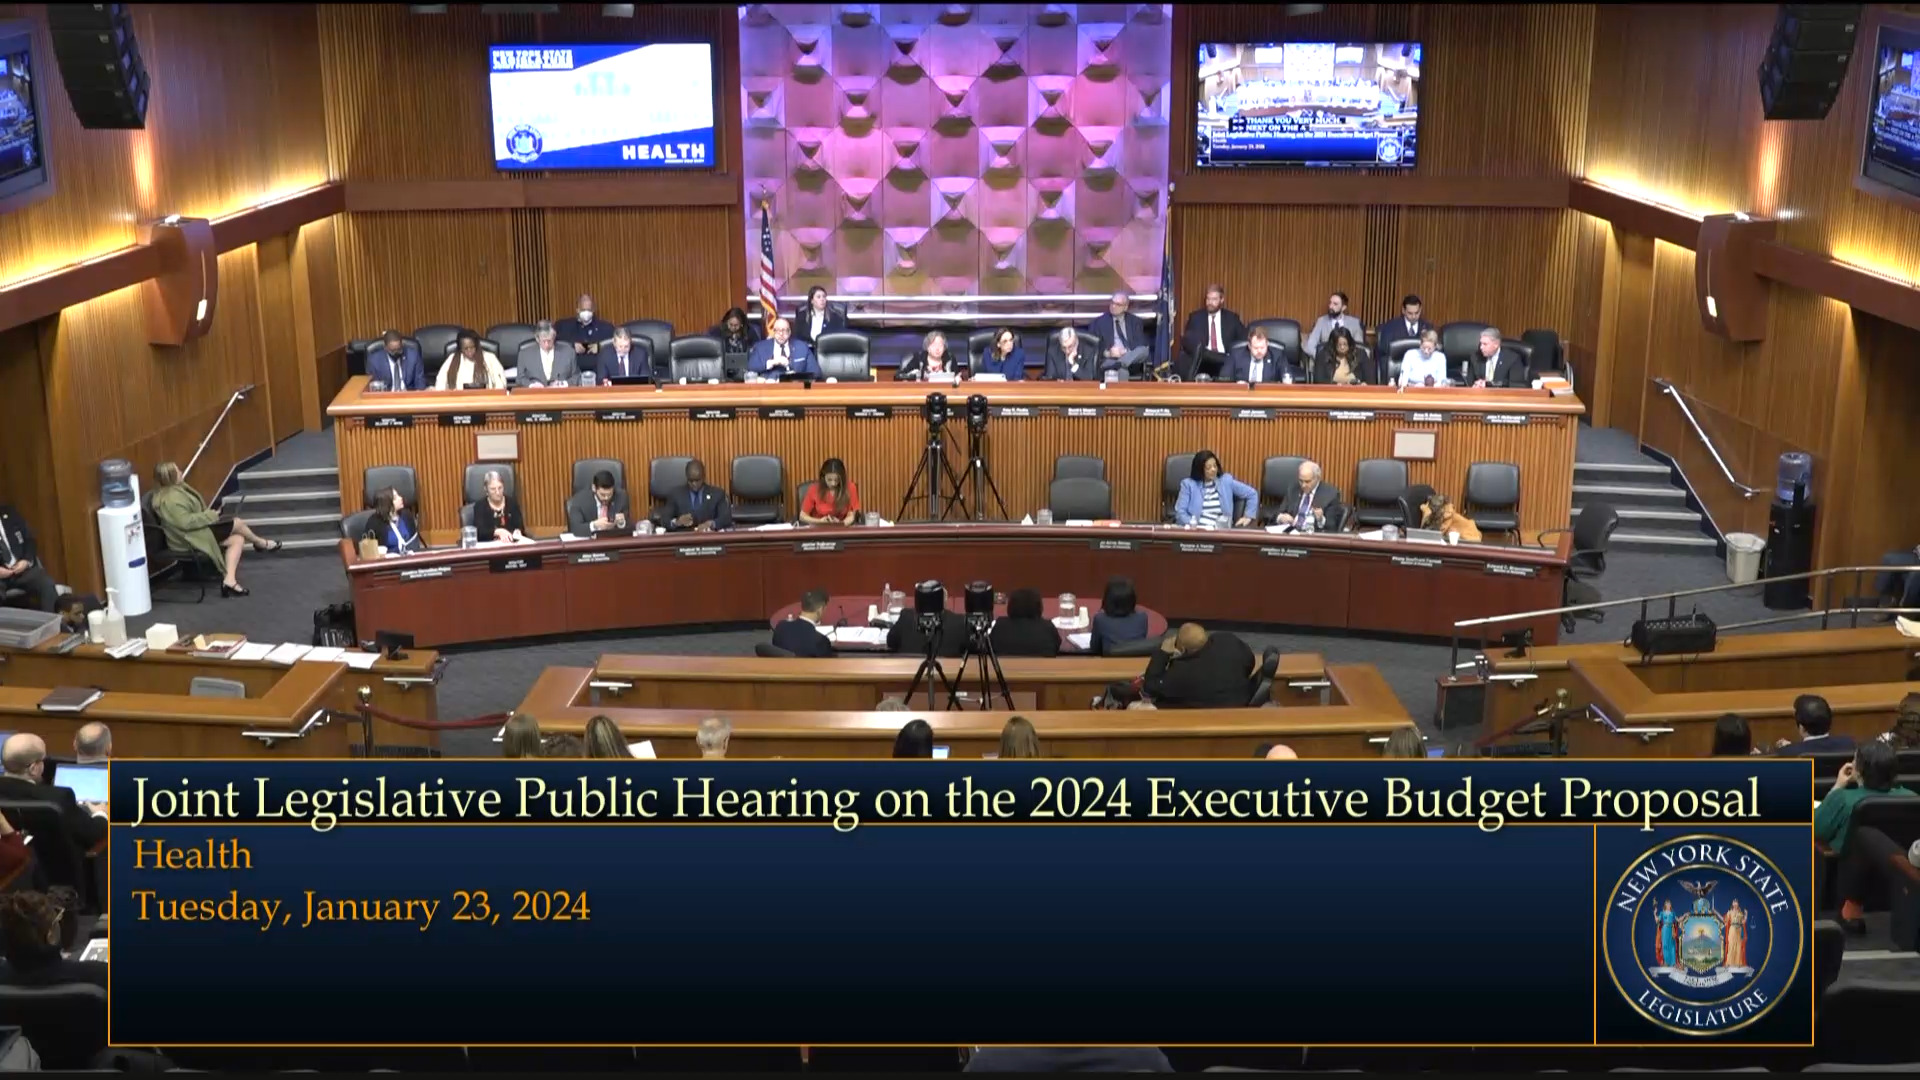 Jacobson Questions Government Officials During Budget Hearing on Health